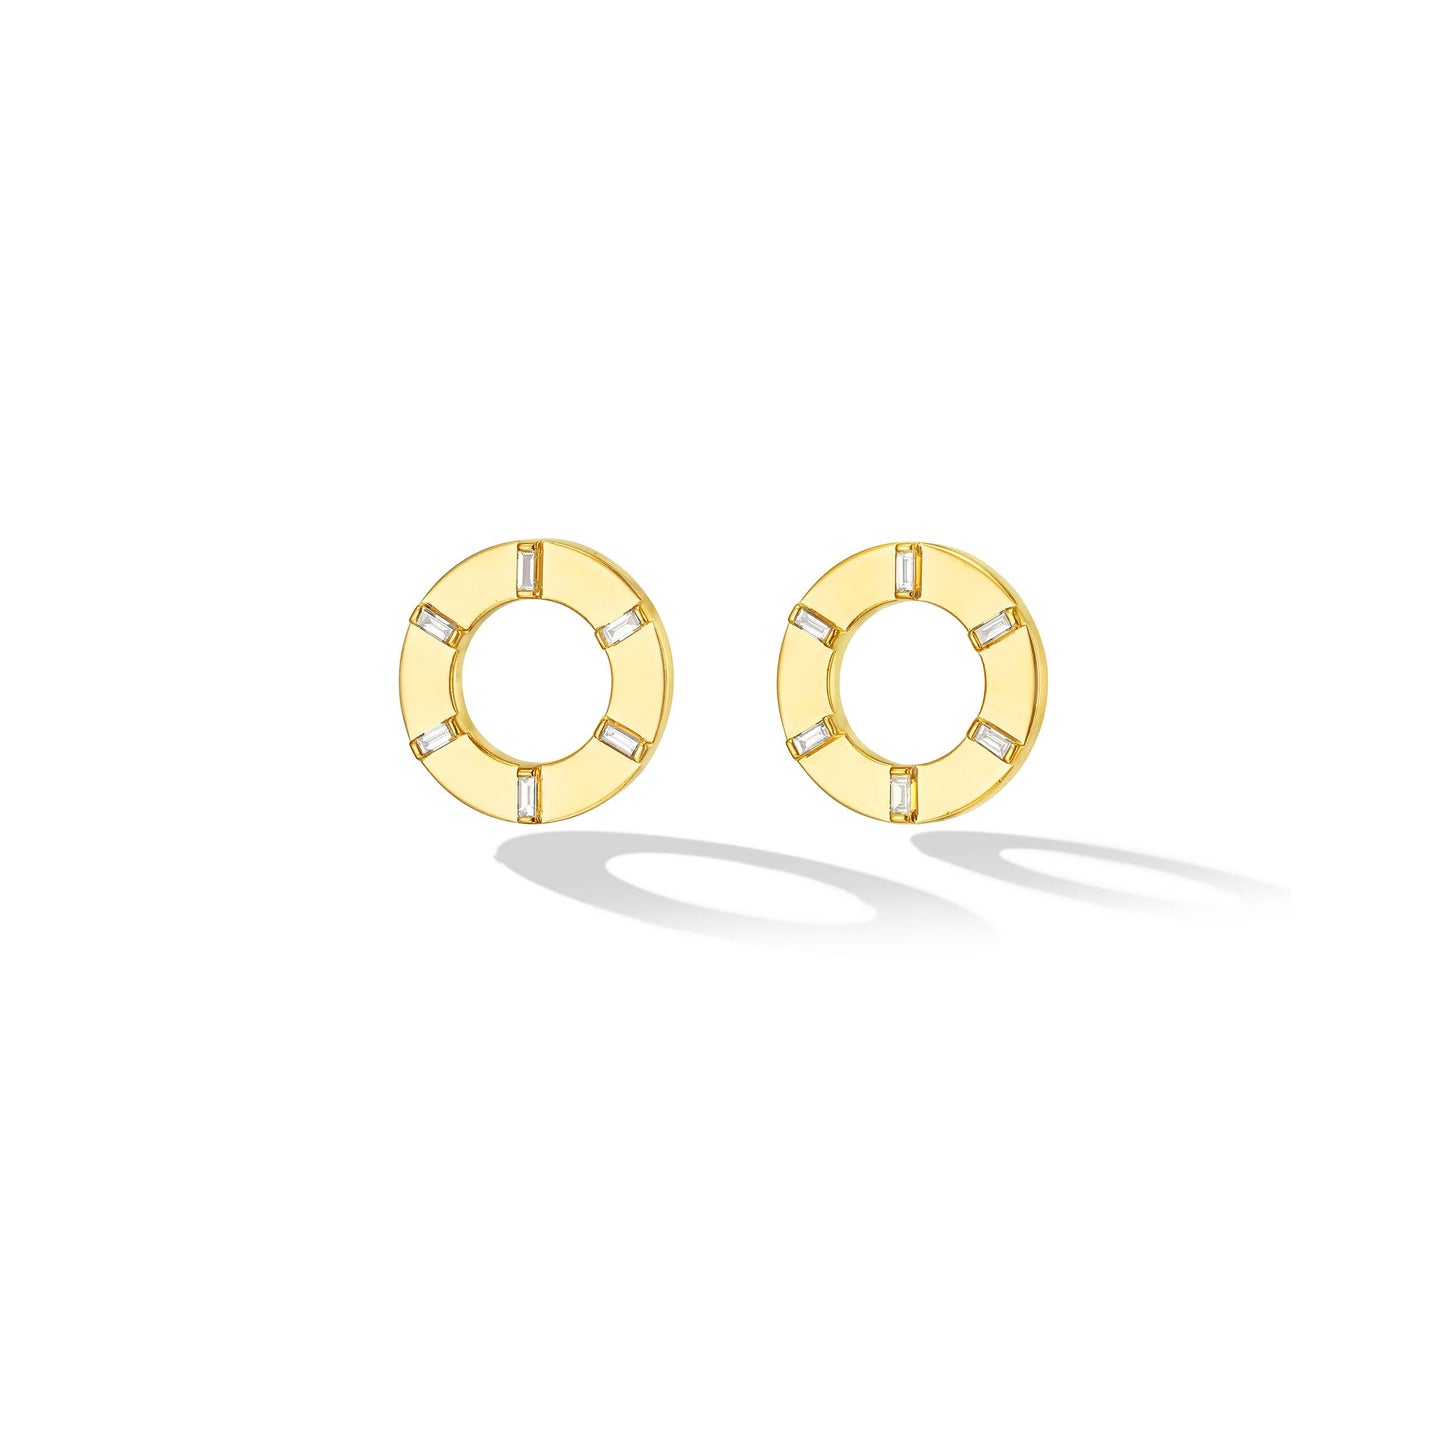 Yellow Gold Prime Unity Stud Earrings with White Diamonds